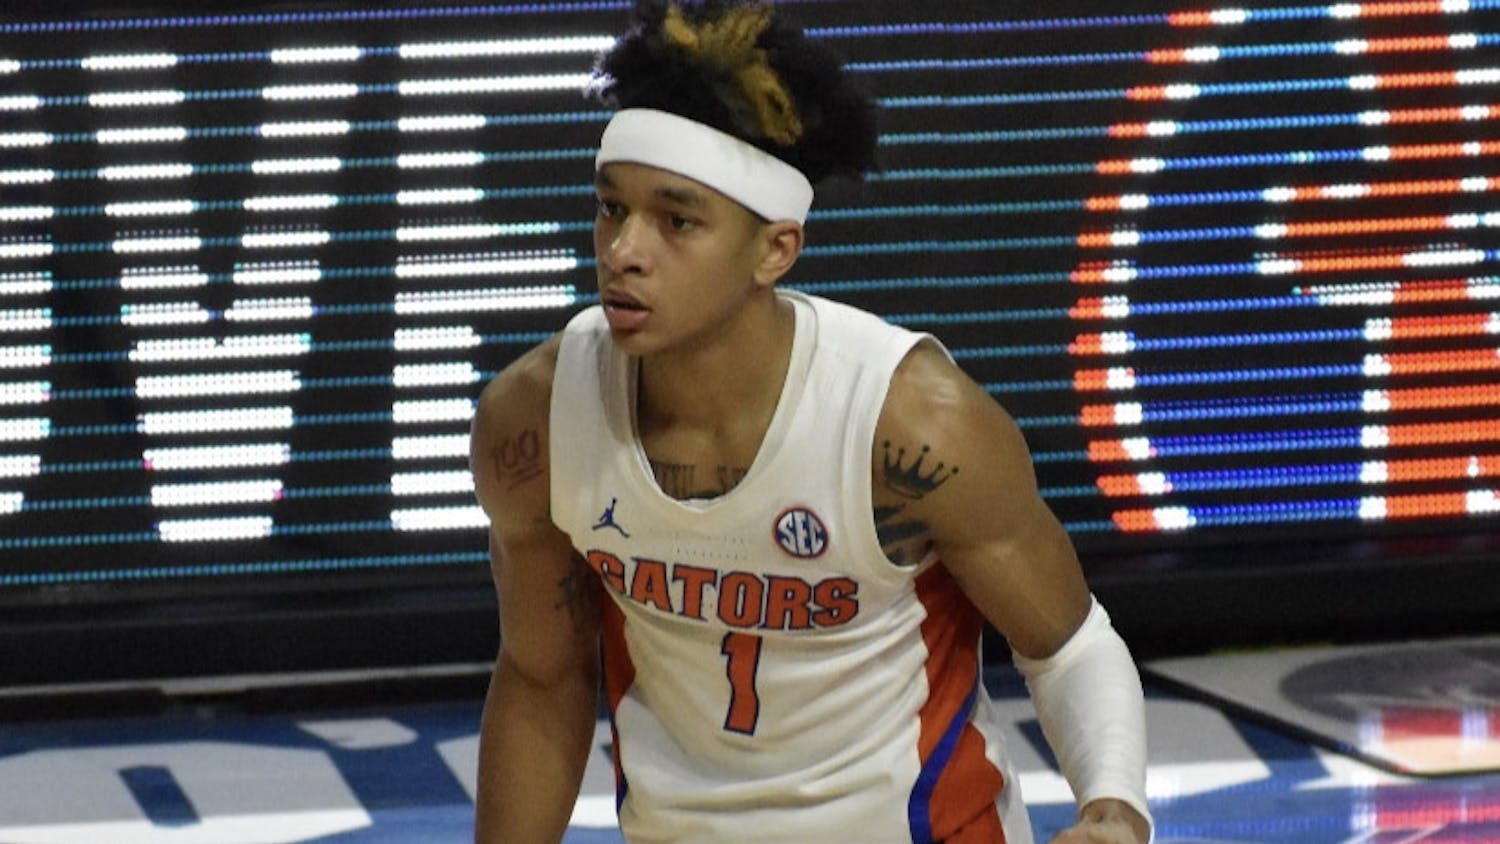 Florida's Tre Mann, who led the Gators with 16.0 points per game in 2020-21, was drafted by the Oklahoma City Thunder 18th overall in Thursday's NBA Draft.